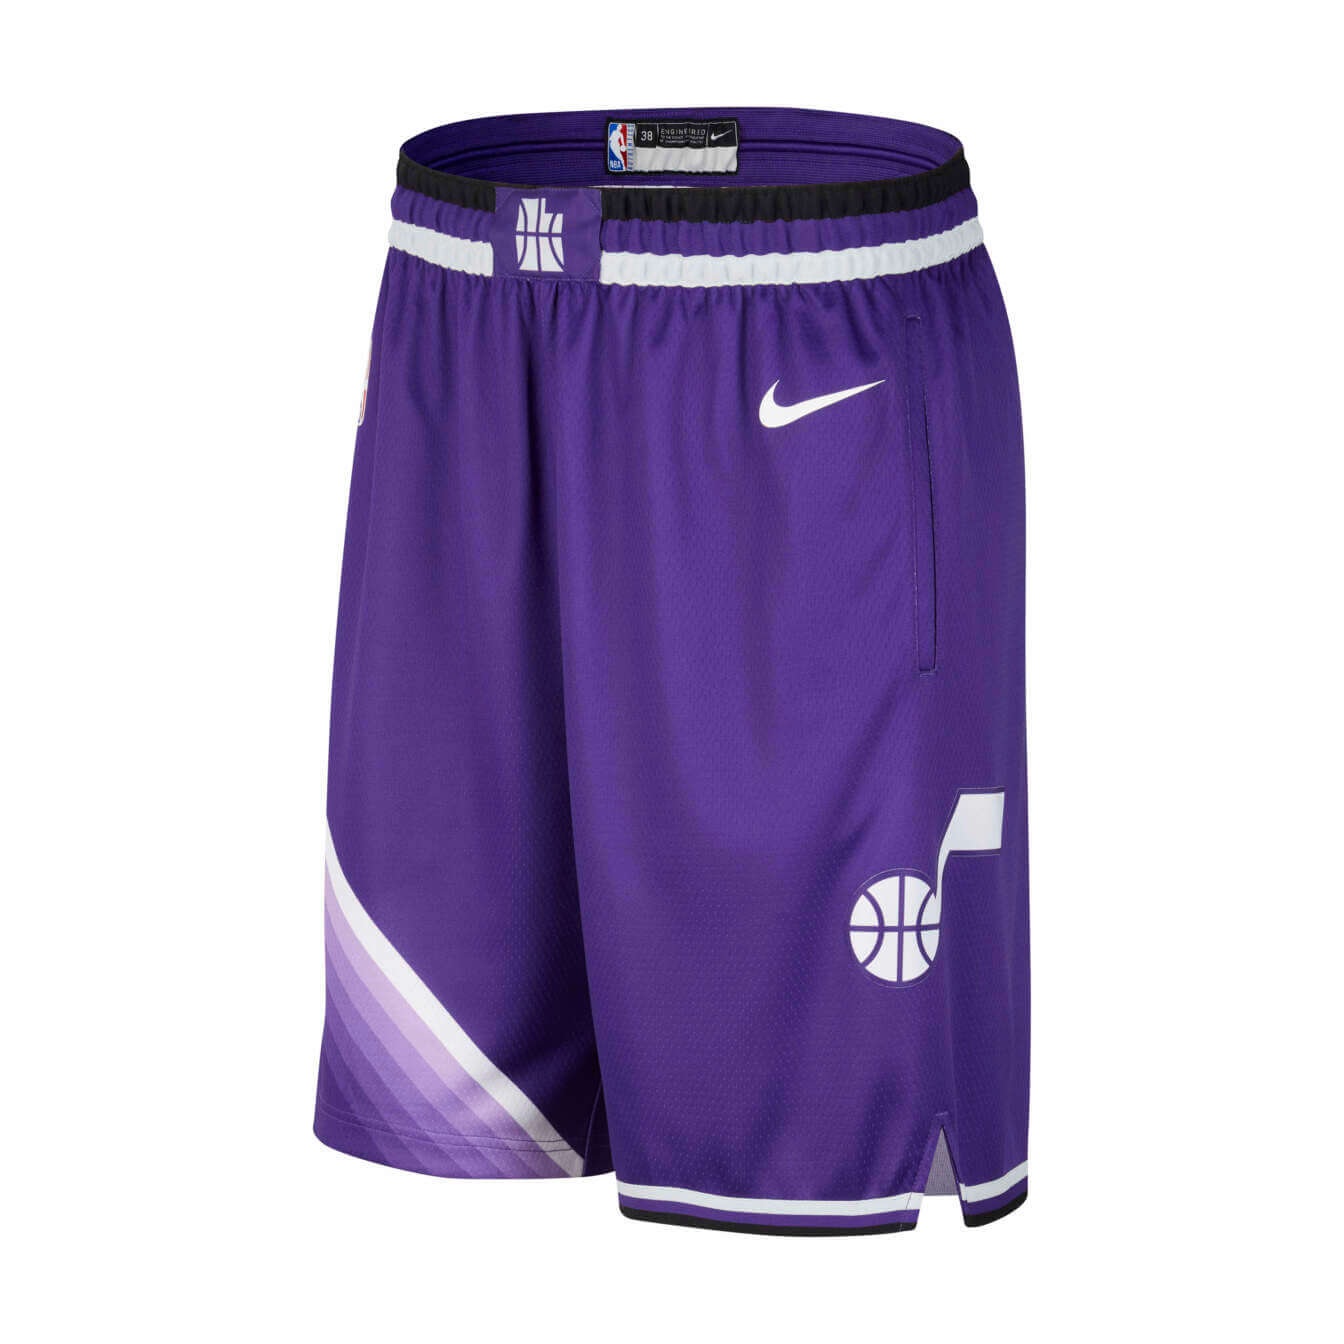 Confusion Over Leaked Hornets City Edition Shorts - Sports